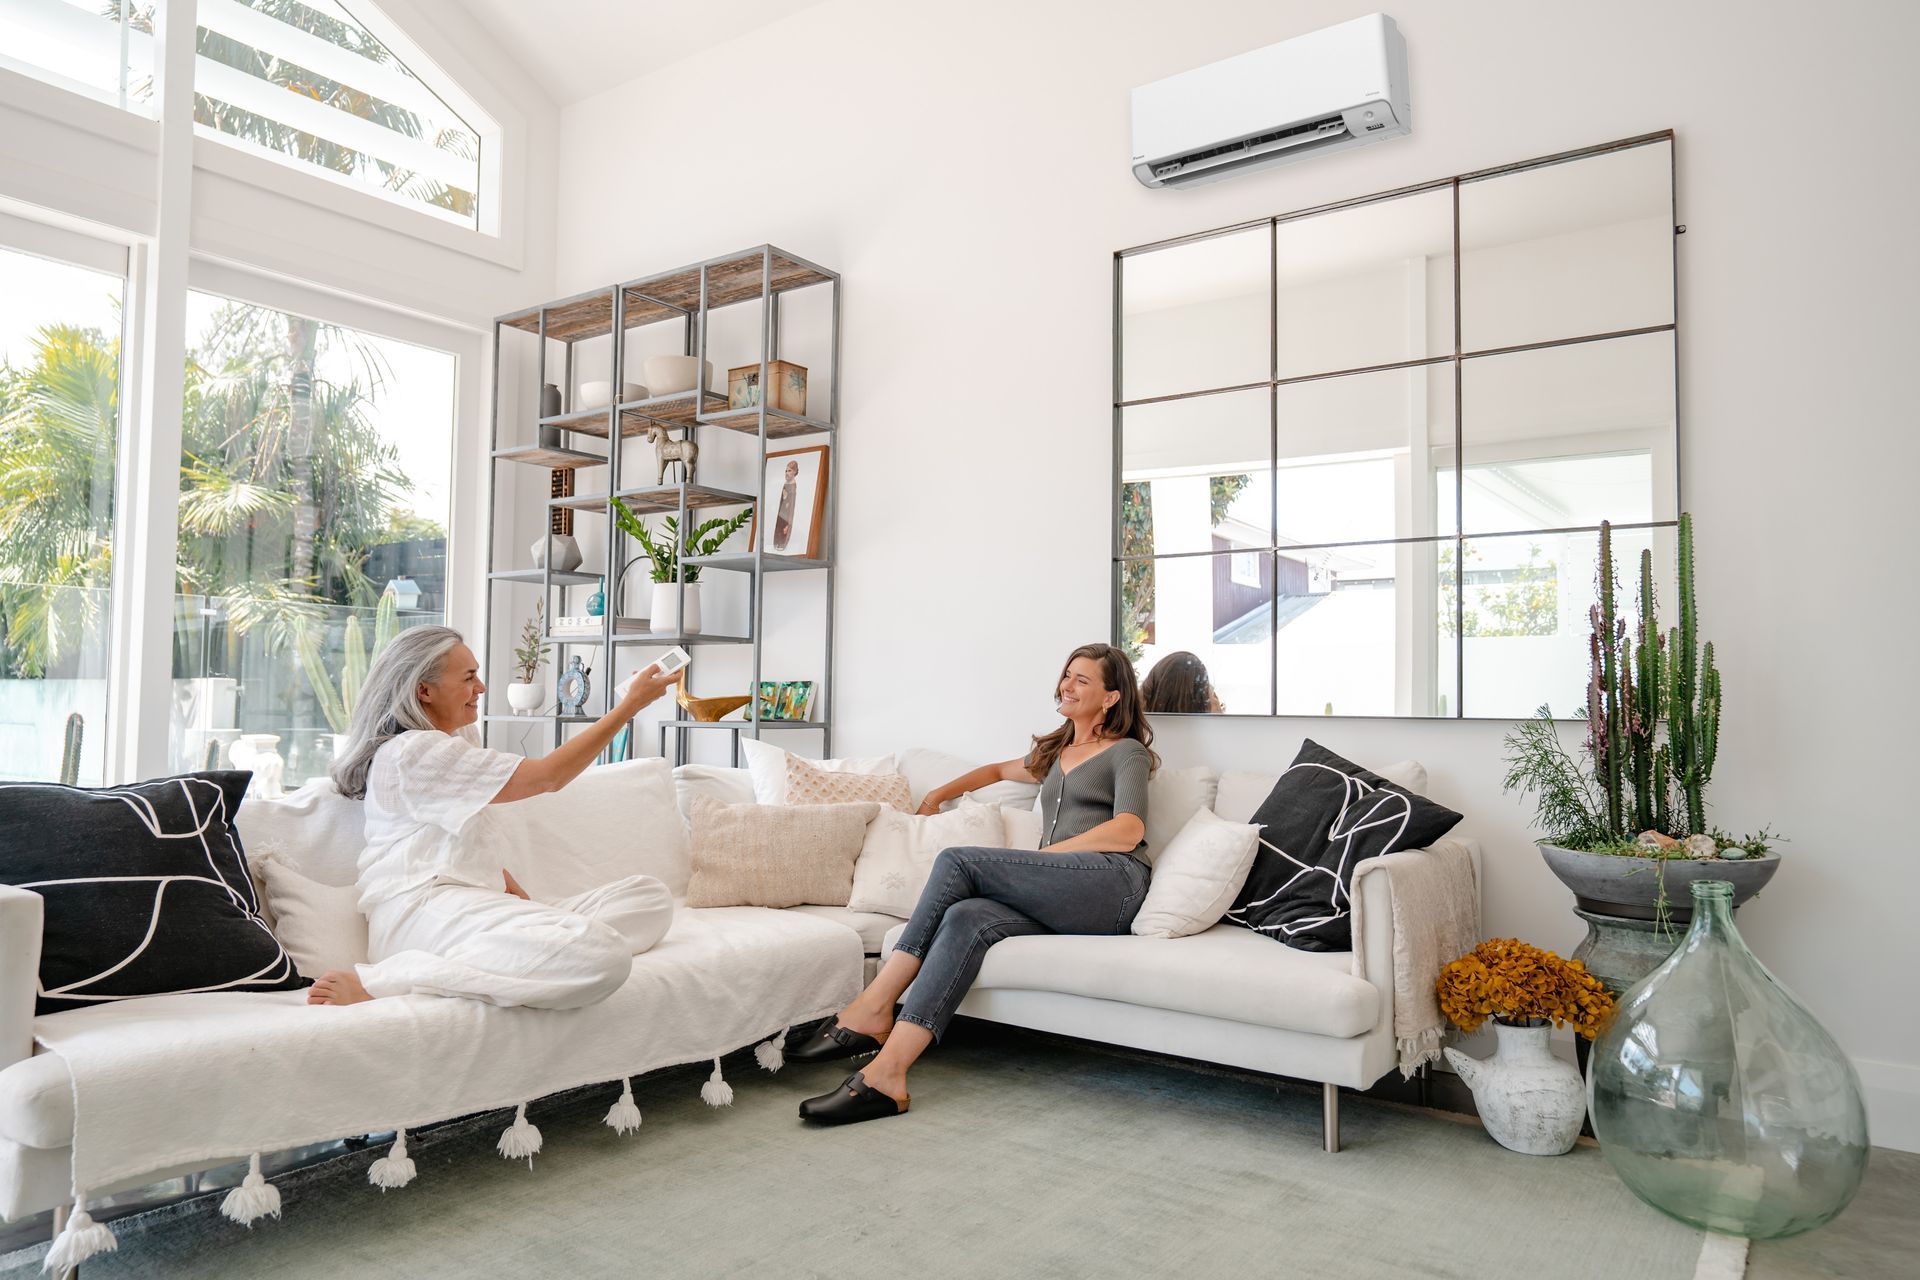 Daikin Alira heat pump in living room with two people using with a remote control